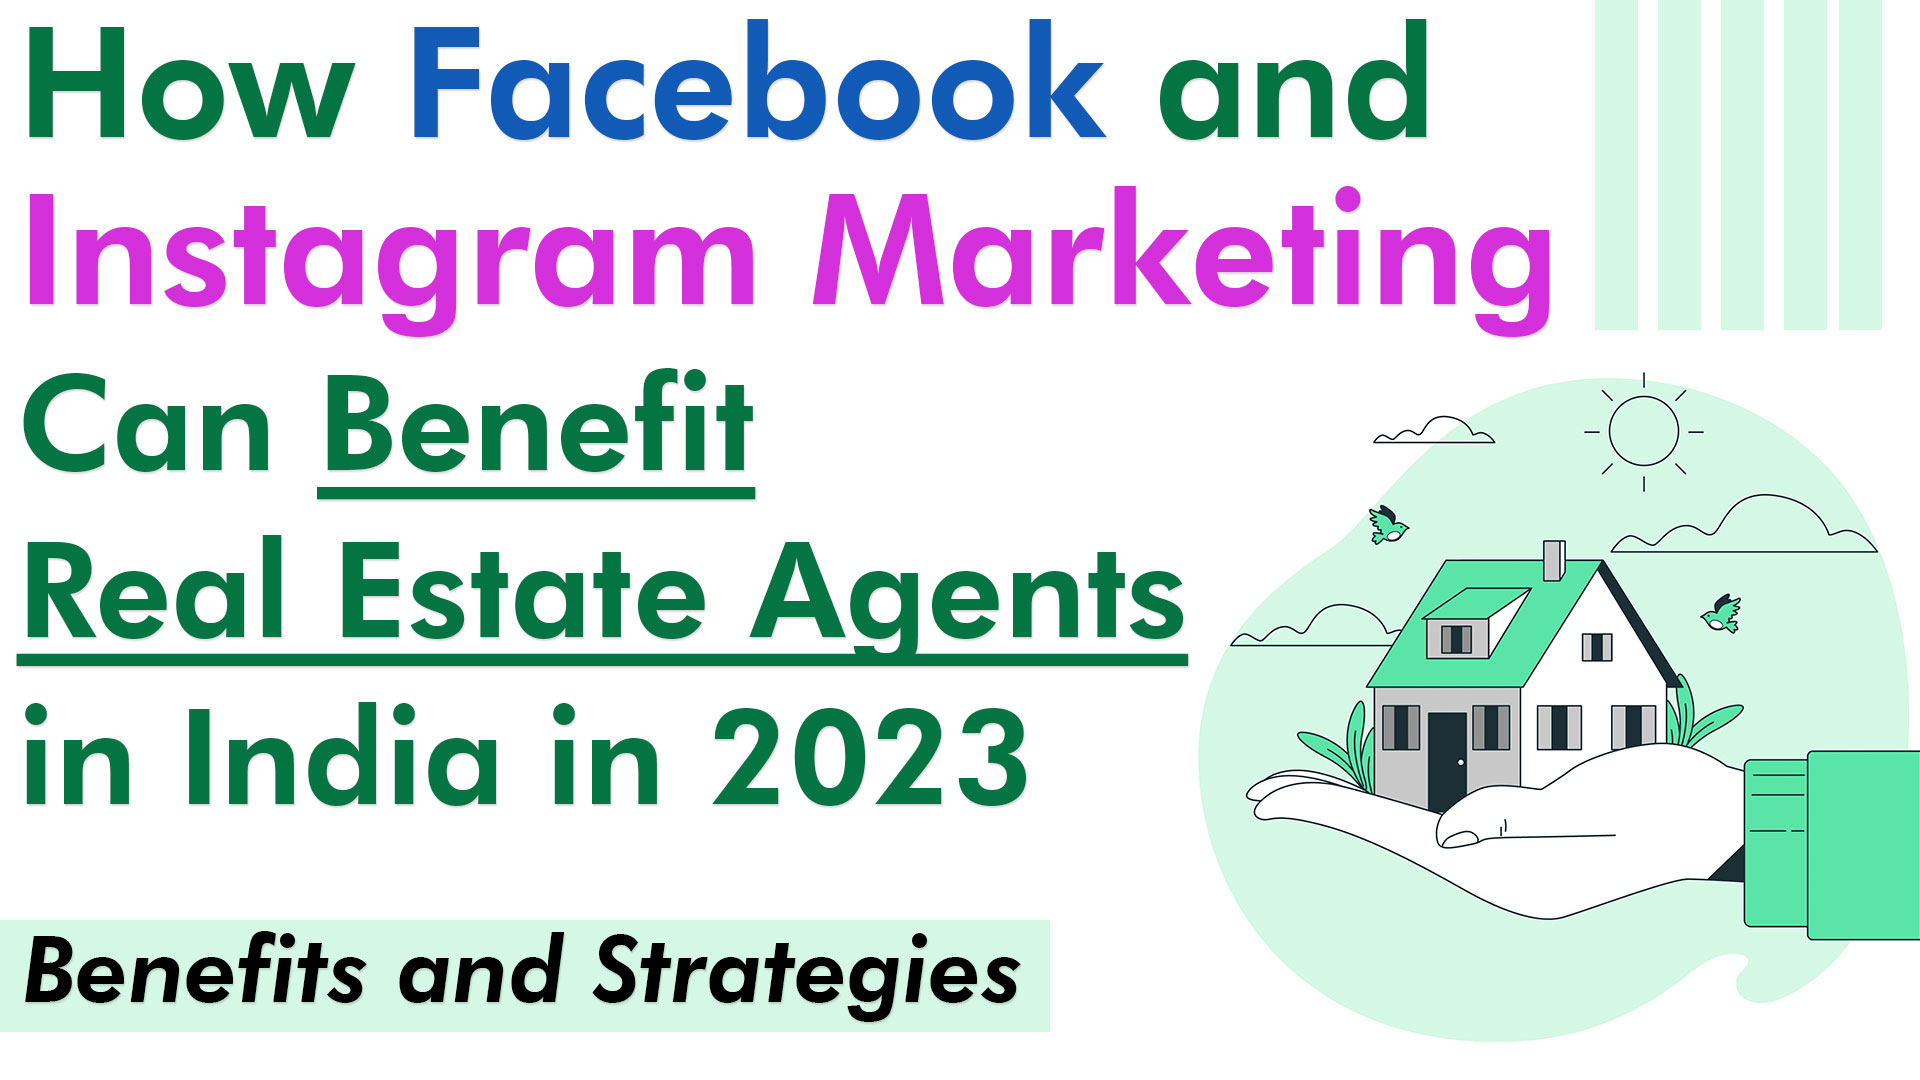 How-Facebook-and-Instagram-Marketing-Can-Benefit-Real-Estate-Agents-In-India-In-2023